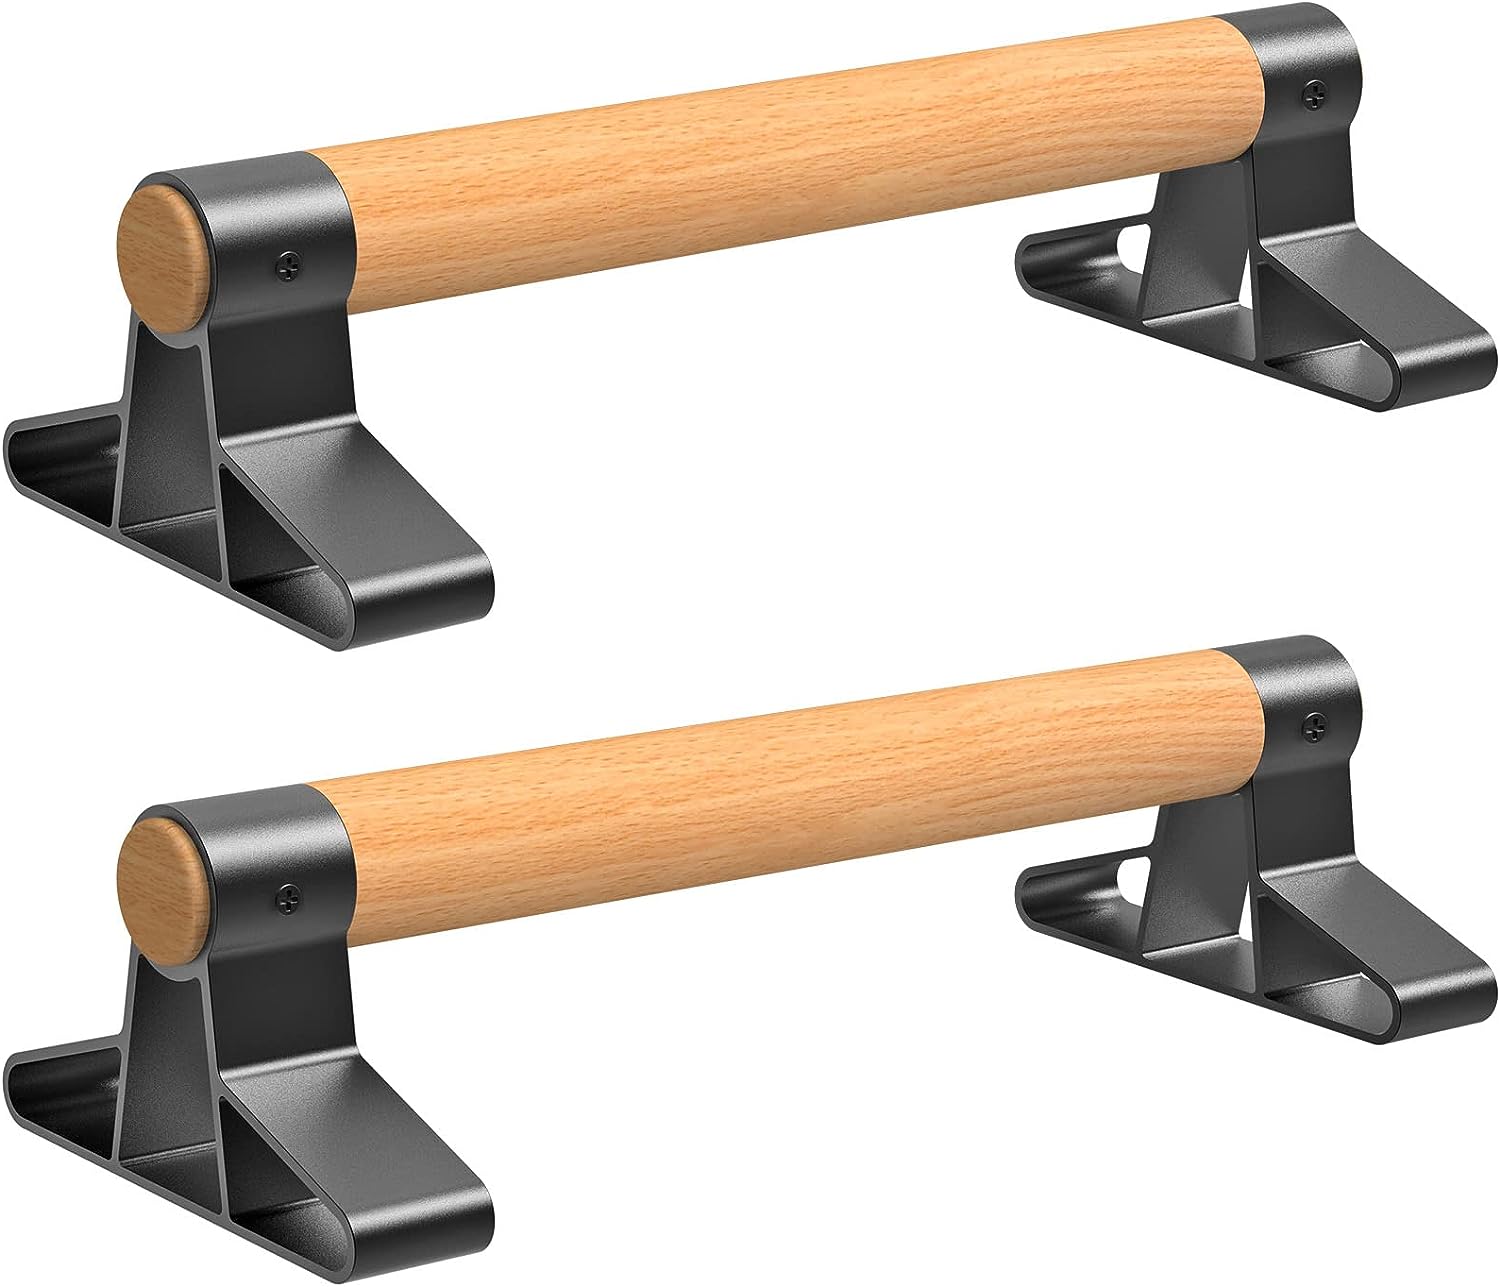 You are currently viewing SELEWARE Wood push up bars Parallettes bars Anti-slip Handstand Bars review